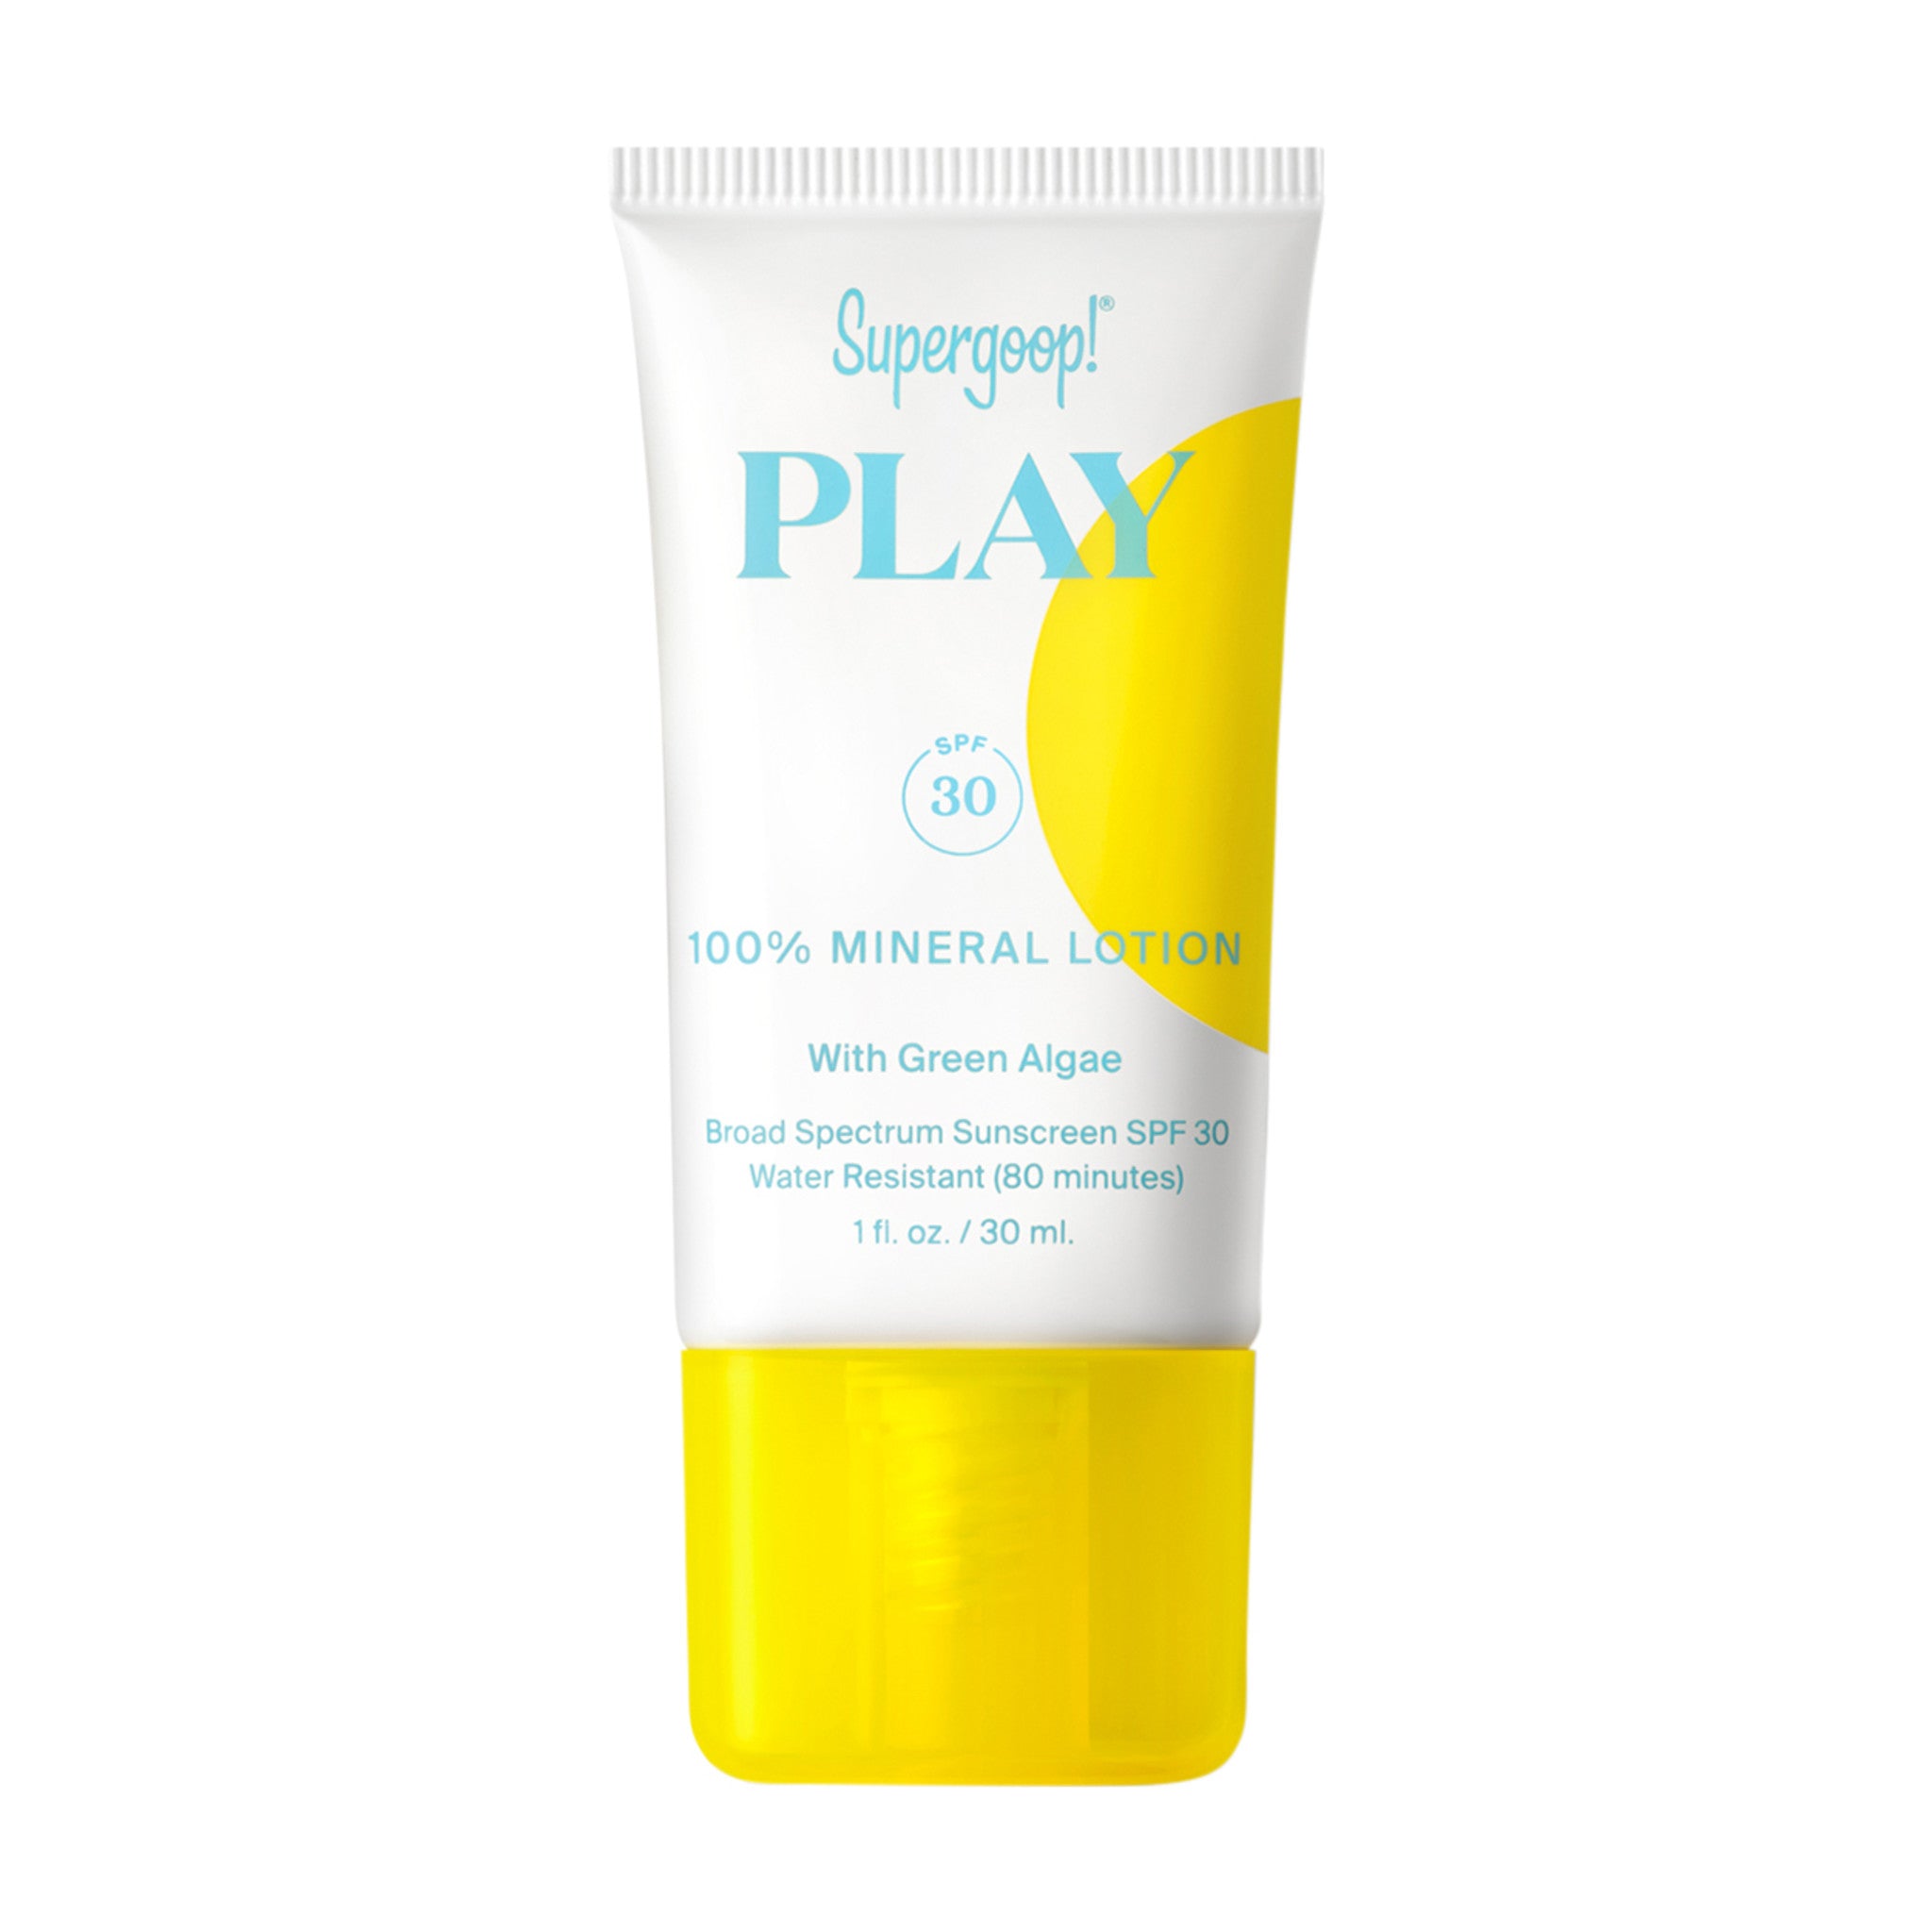 Supergoop! Play 100% Mineral Lotion With Green Algae SPF 30 Size variant: 1 fl oz | 30 ml main image.